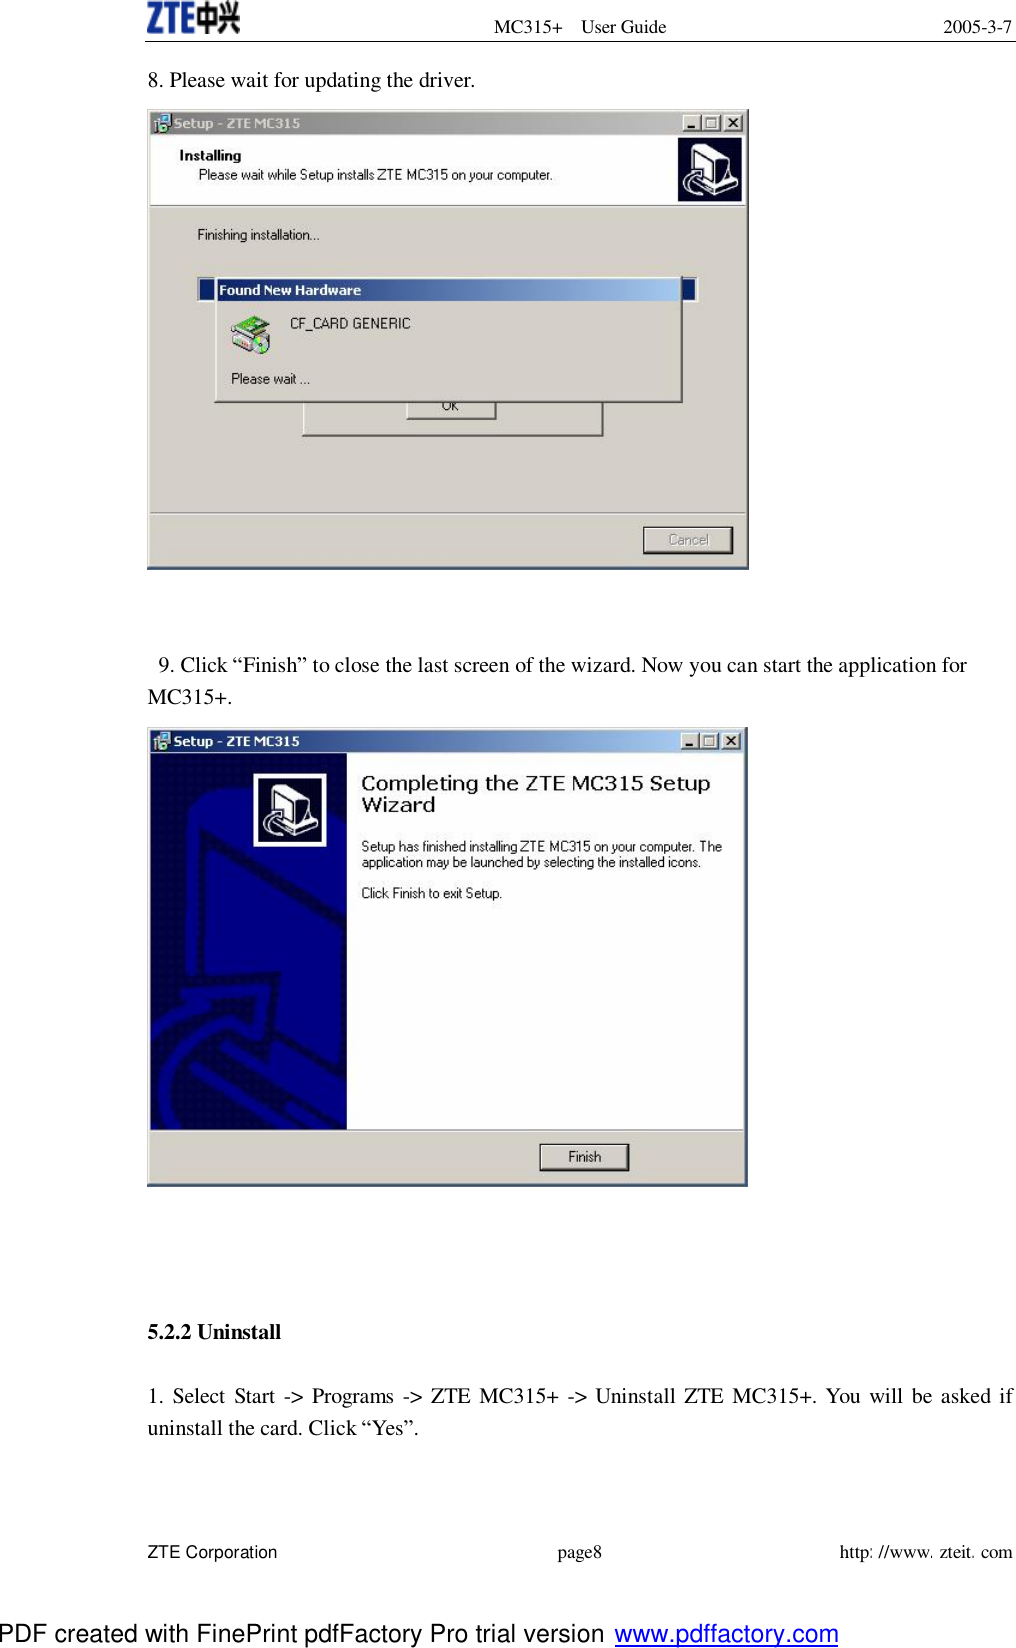  MC315+ User Guide 2005-3-7  ZTE Corporation page8 http://www.zteit.com 8. Please wait for updating the driver.     9. Click “Finish” to close the last screen of the wizard. Now you can start the application for MC315+.     5.2.2 Uninstall   1. Select Start -&gt; Programs -&gt; ZTE MC315+ -&gt; Uninstall ZTE MC315+. You will be asked if uninstall the card. Click “Yes”. PDF created with FinePrint pdfFactory Pro trial version www.pdffactory.com